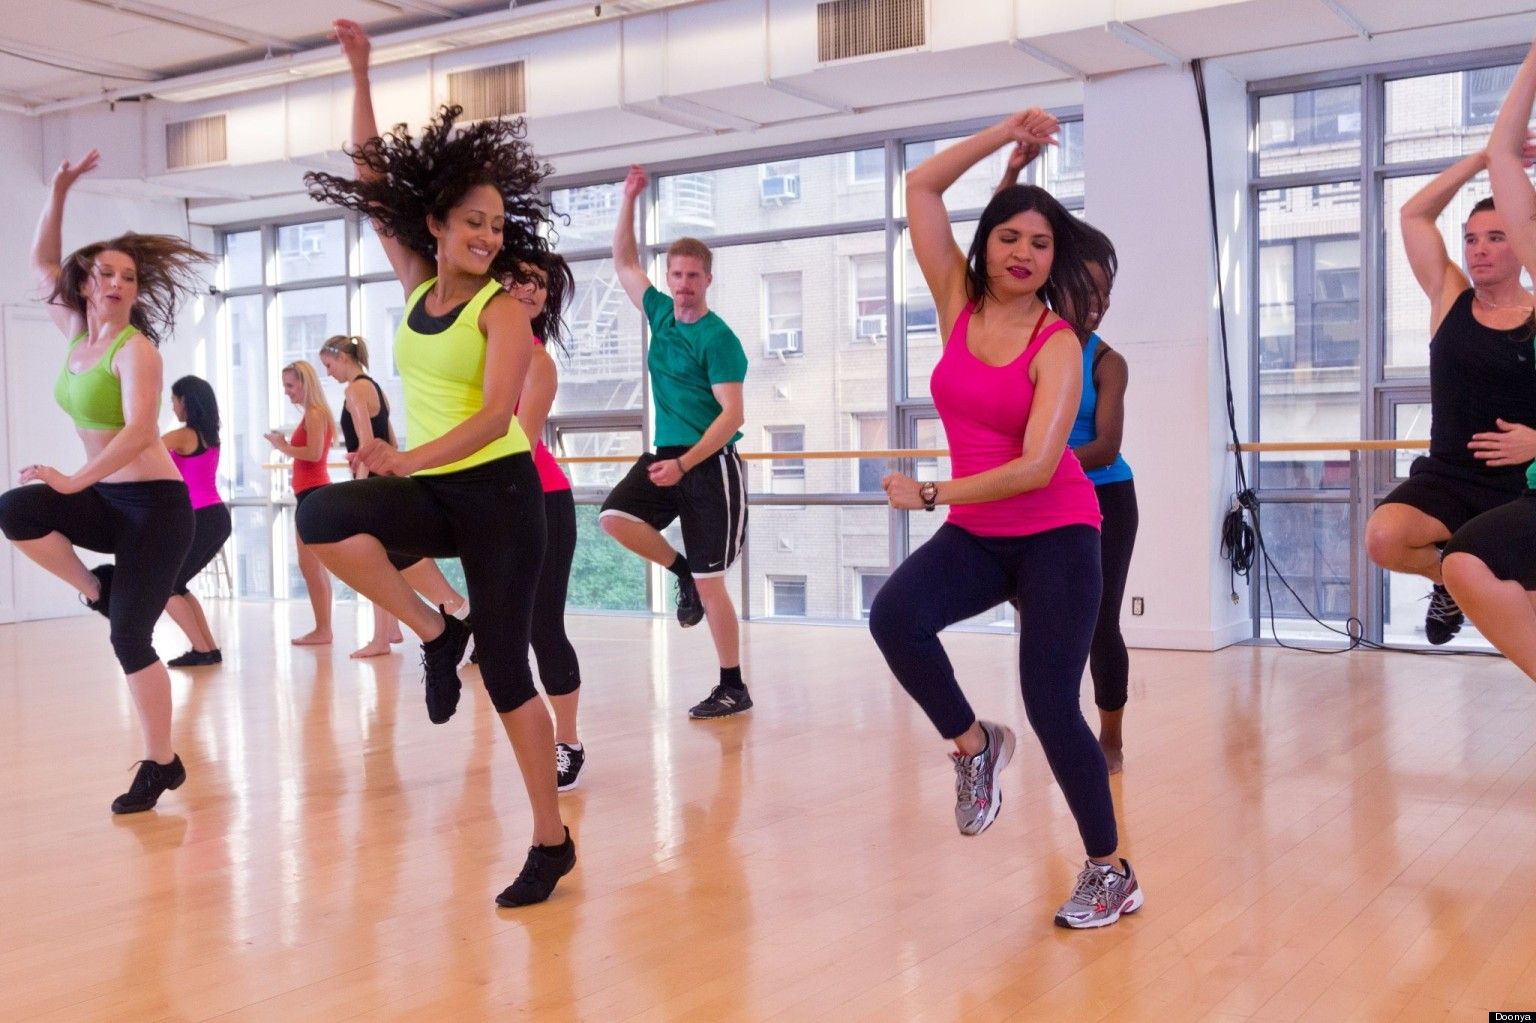 How to Become an Aerobics or Dance Instructor?